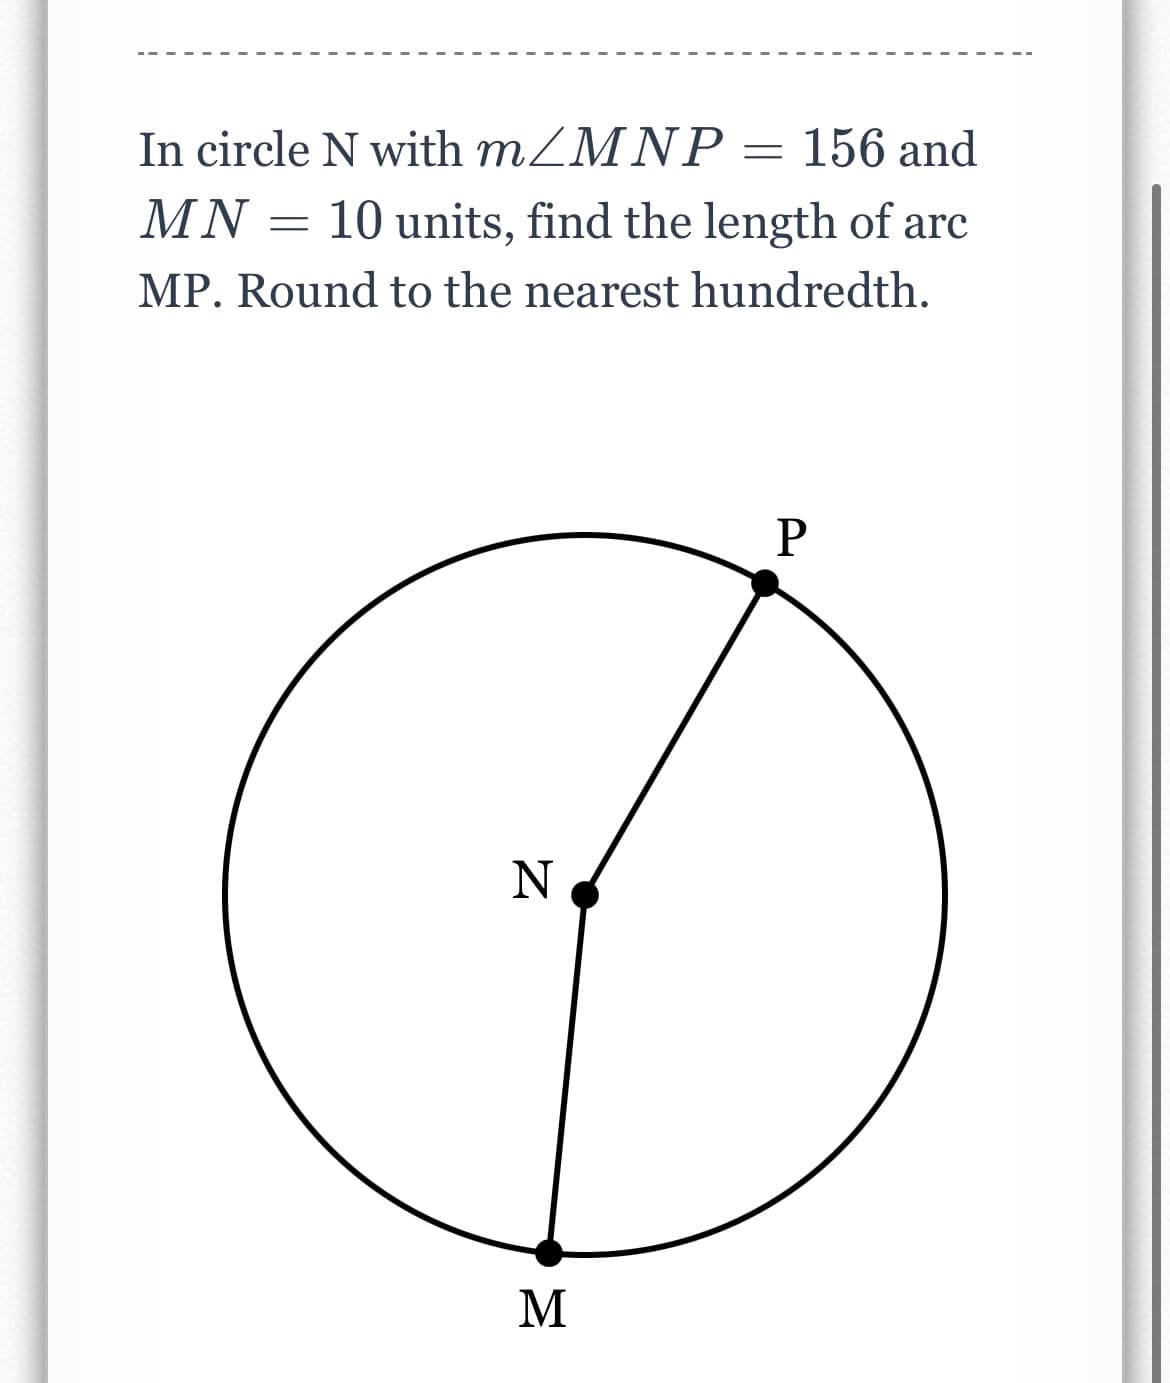 **Problem Statement:**
In circle N with \( m \angle MNP = 156 \) and \( MN = 10 \) units, find the length of arc MP. Round to the nearest hundredth.

**Diagram Explanation:**
This is a simple circle diagram with three points, M, N, and P:
- N is the center of the circle.
- M and P are points on the circumference of the circle.
- The angle \( \angle MNP = 156^\circ \).
- The radius MN is given as 10 units.

The problem requires you to calculate the length of arc MP and round the answer to the nearest hundredth.

**Solution Steps:**
1. Determine the radius of the circle, which is given as 10 units.
2. Recognize that the given angle \( \angle MNP = 156^\circ \) is the central angle subtending the arc MP.
3. Use the formula for the length of an arc, \( L = \theta \cdot r \), where \( \theta \) is the central angle in radians and \( r \) is the radius.

Convert the central angle from degrees to radians:
\[ \theta = 156^\circ \times \frac{\pi}{180^\circ} = \frac{156\pi}{180} = \frac{13\pi}{15} \text{ radians} \]

4. Calculate the arc length:
\[ L = \frac{13\pi}{15} \cdot 10 \text{ units} \]
\[ L = \frac{130\pi}{15} \text{ units} \]
\[ L \approx 27.20 \text{ units (rounded to the nearest hundredth)} \]

Thus, the length of arc MP is approximately 27.20 units.